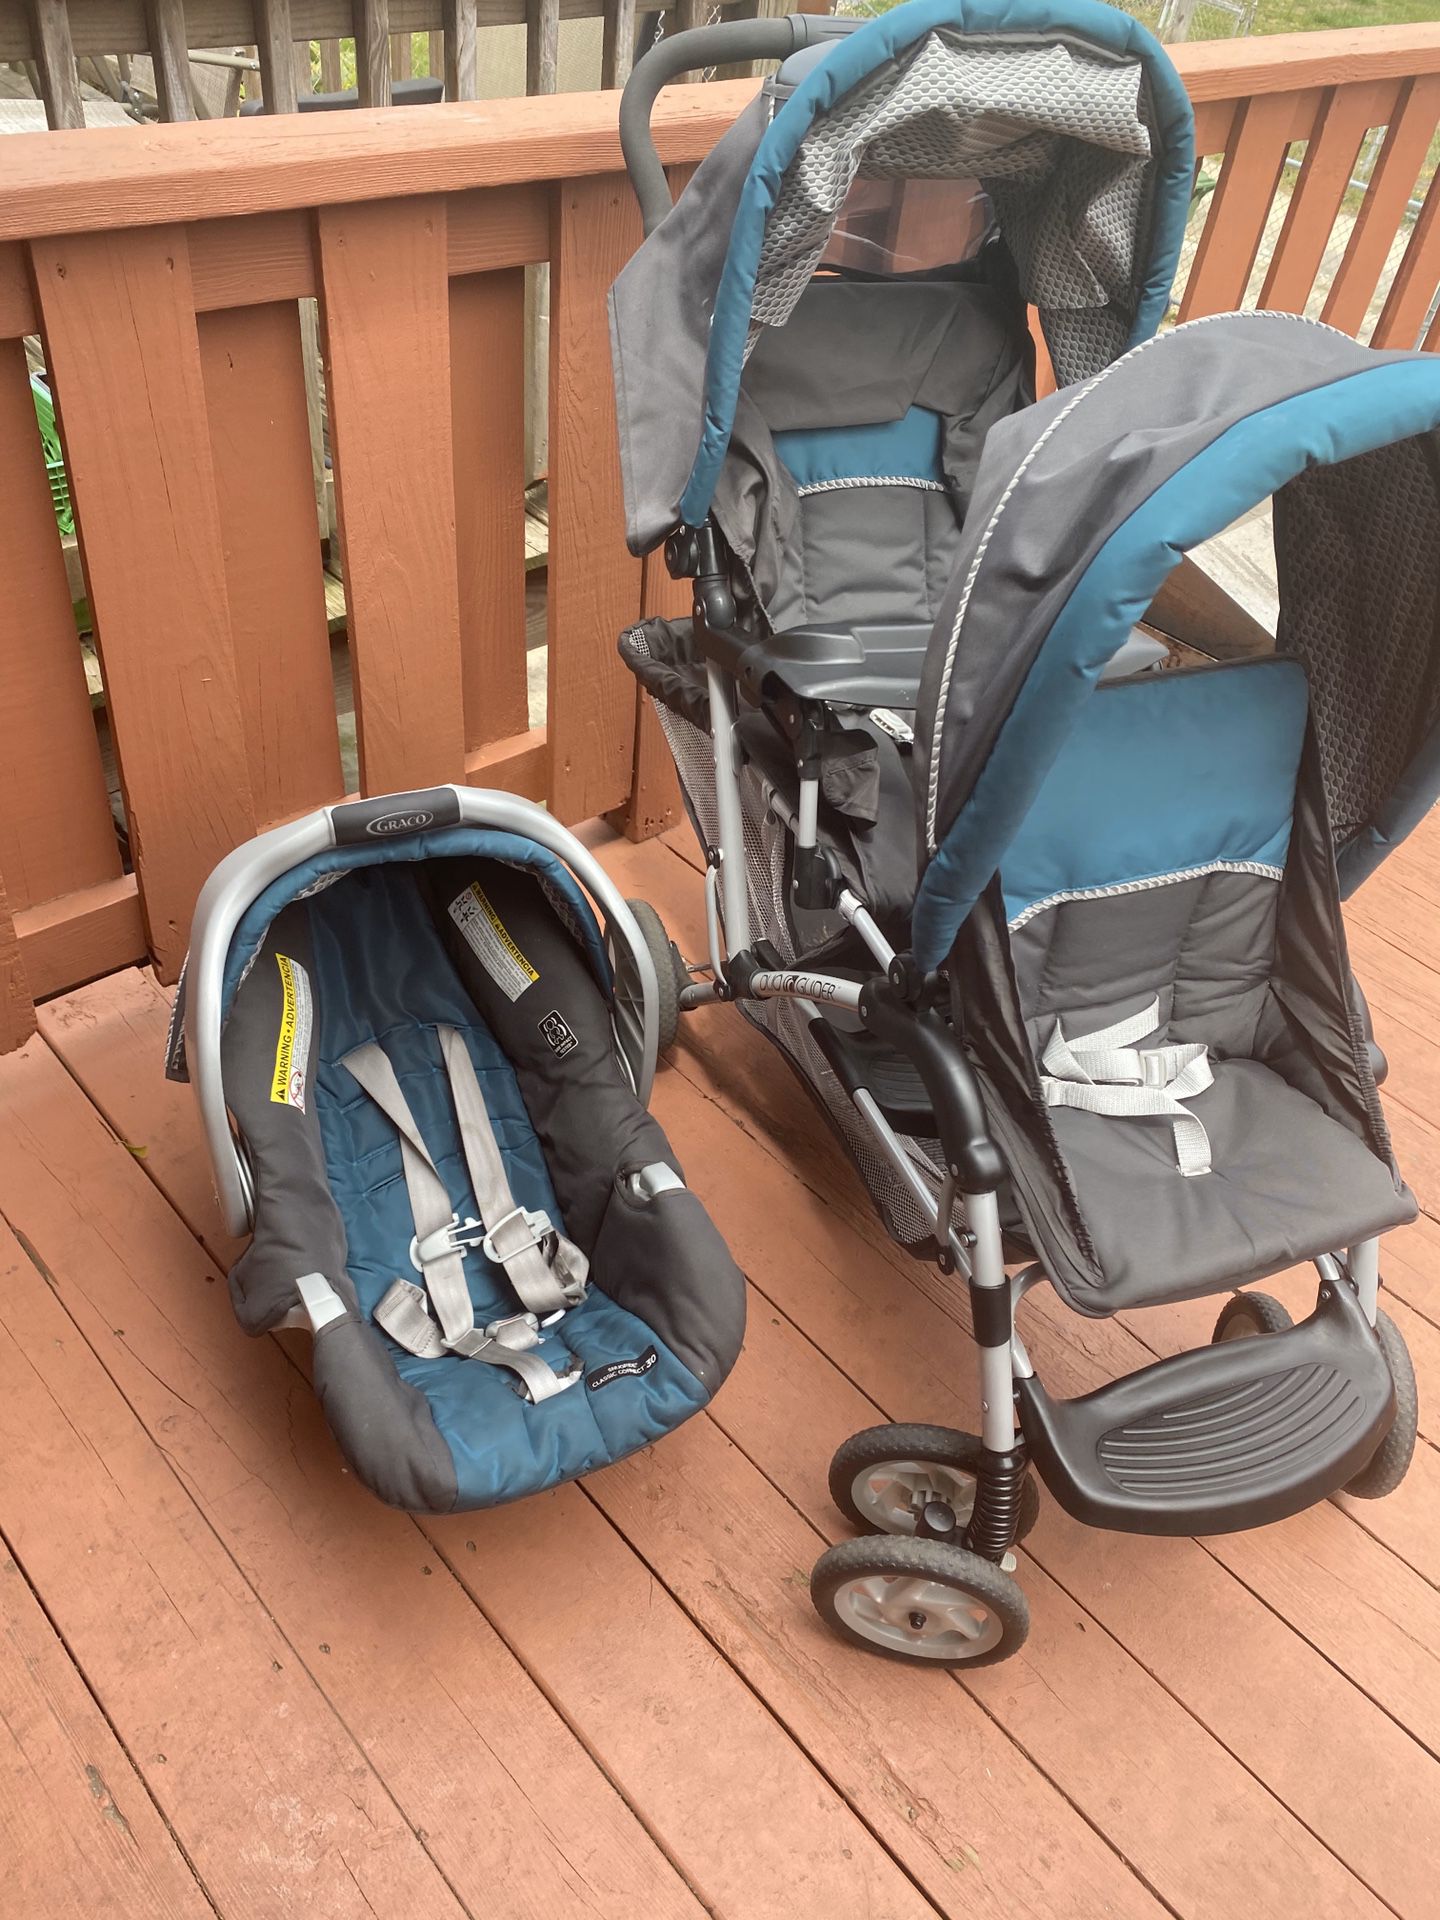 Graco car seat and double stroller.